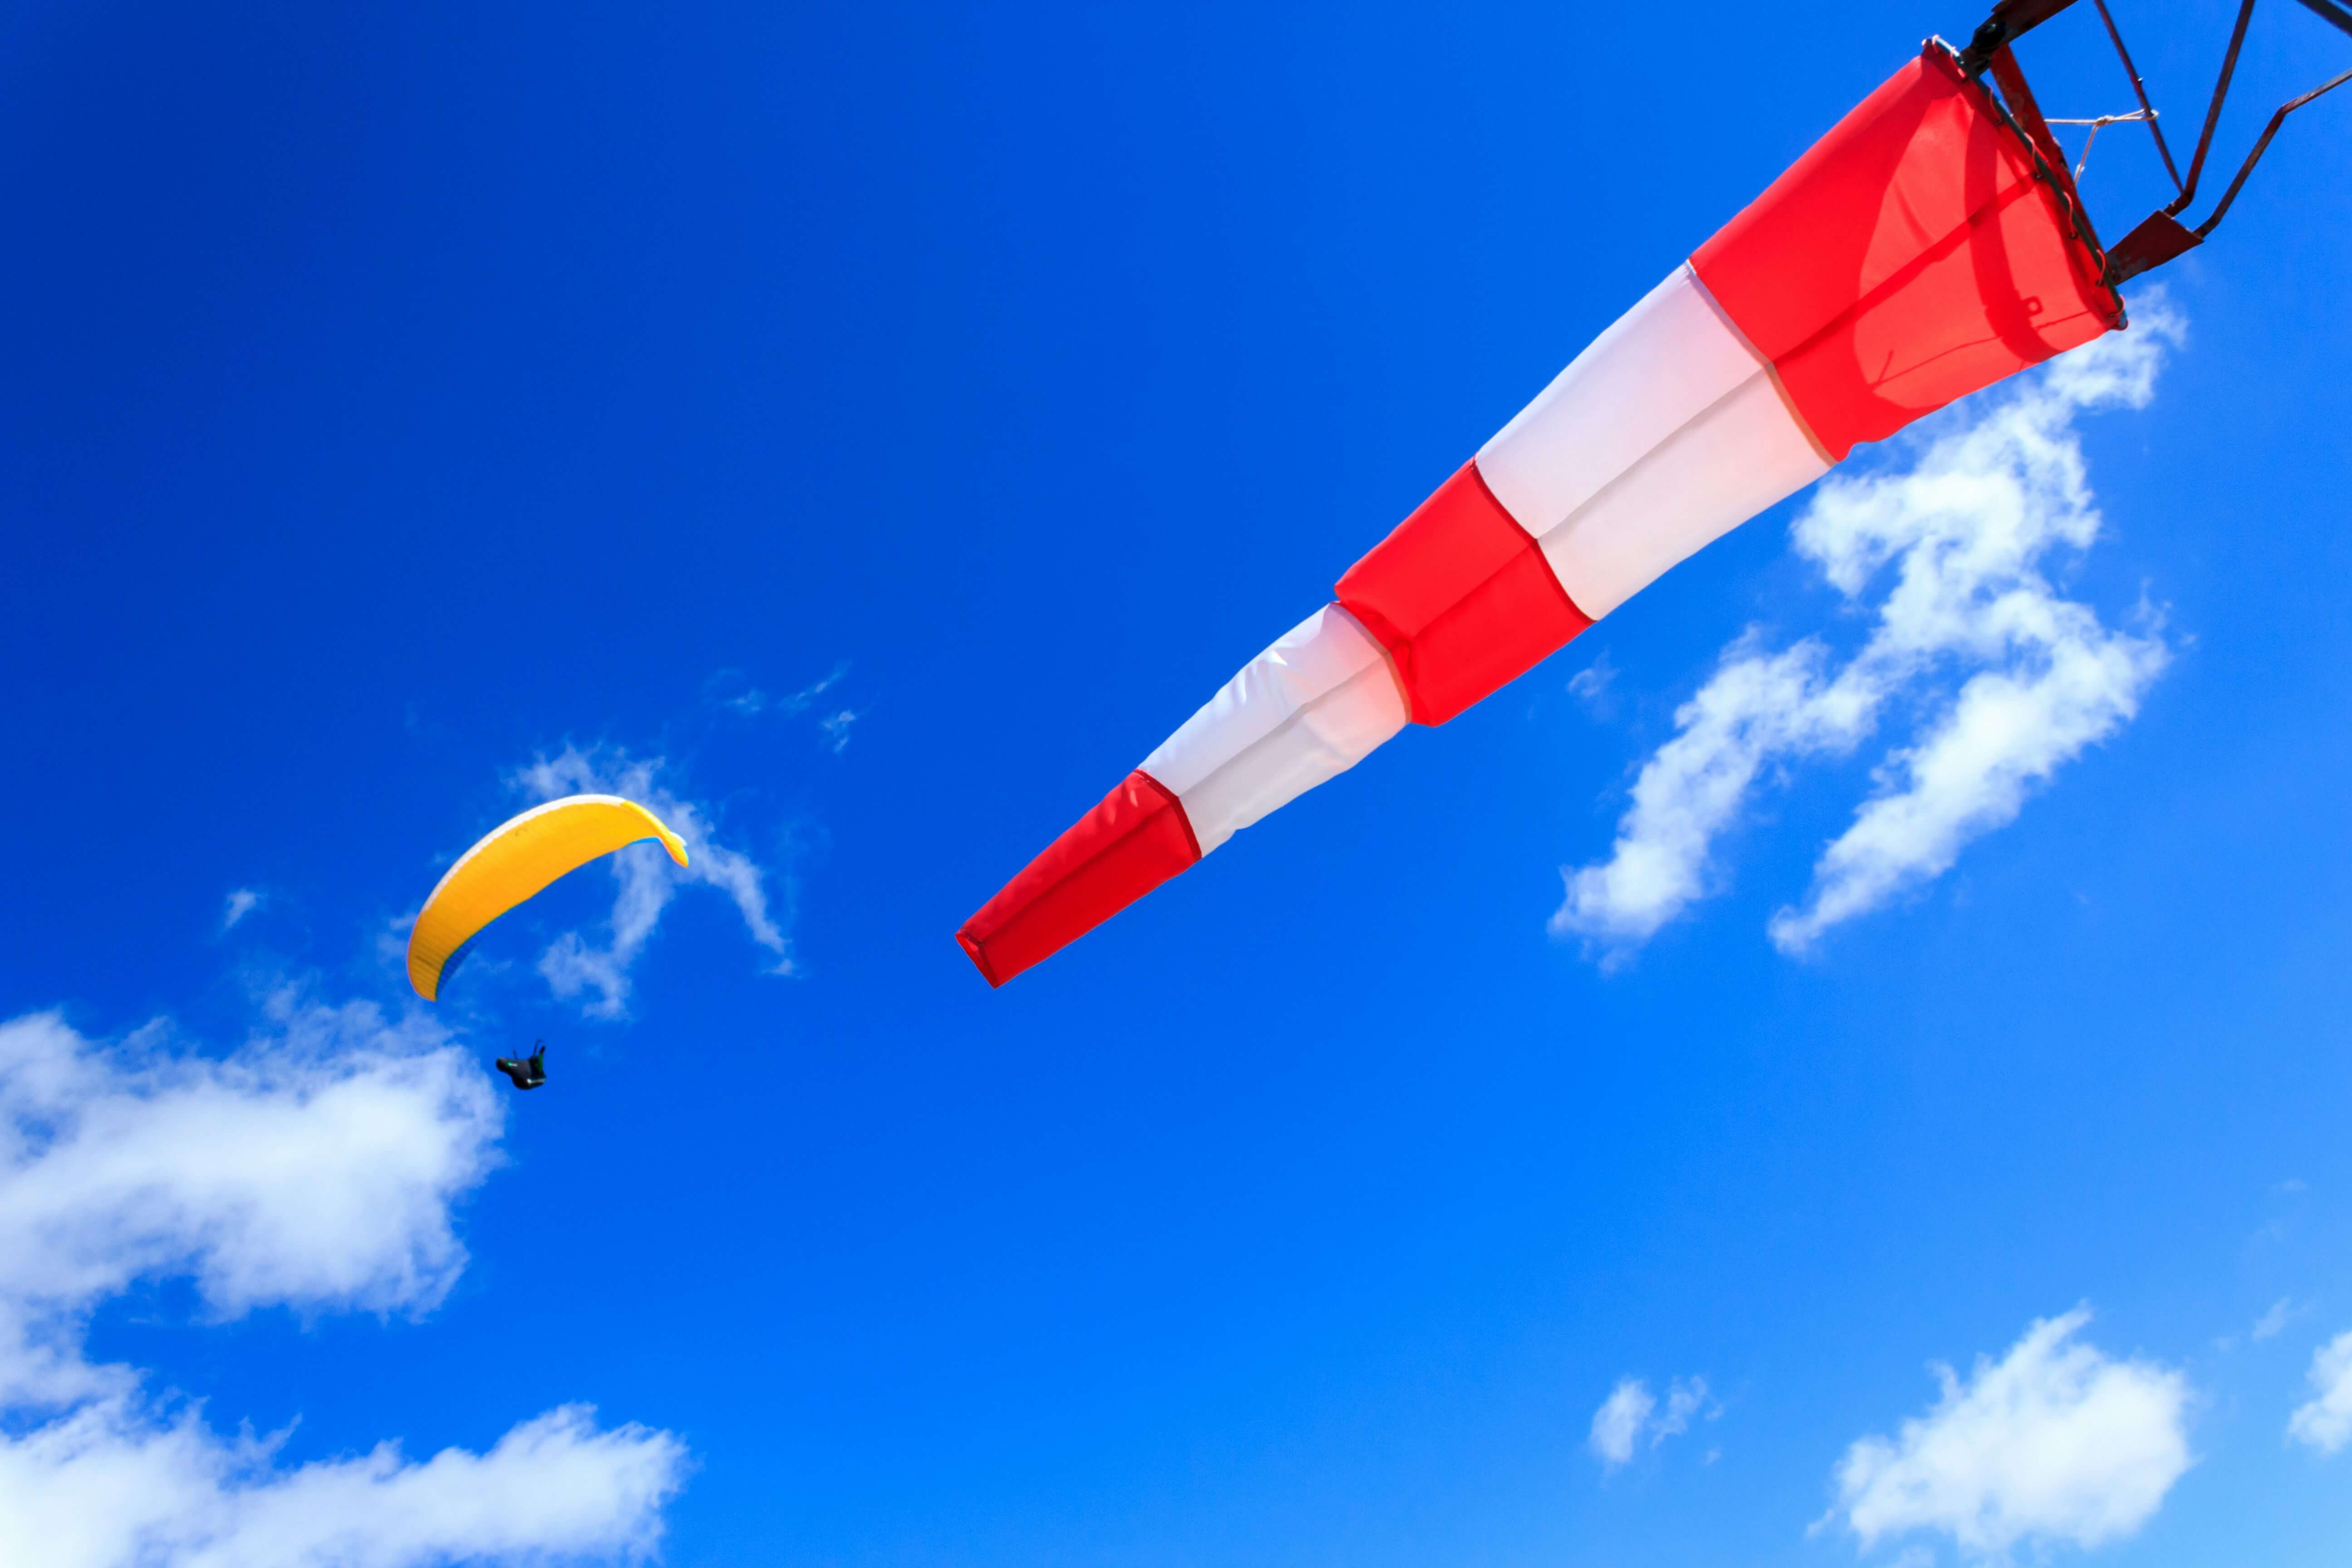 a windsock blowing while a person parasails over it